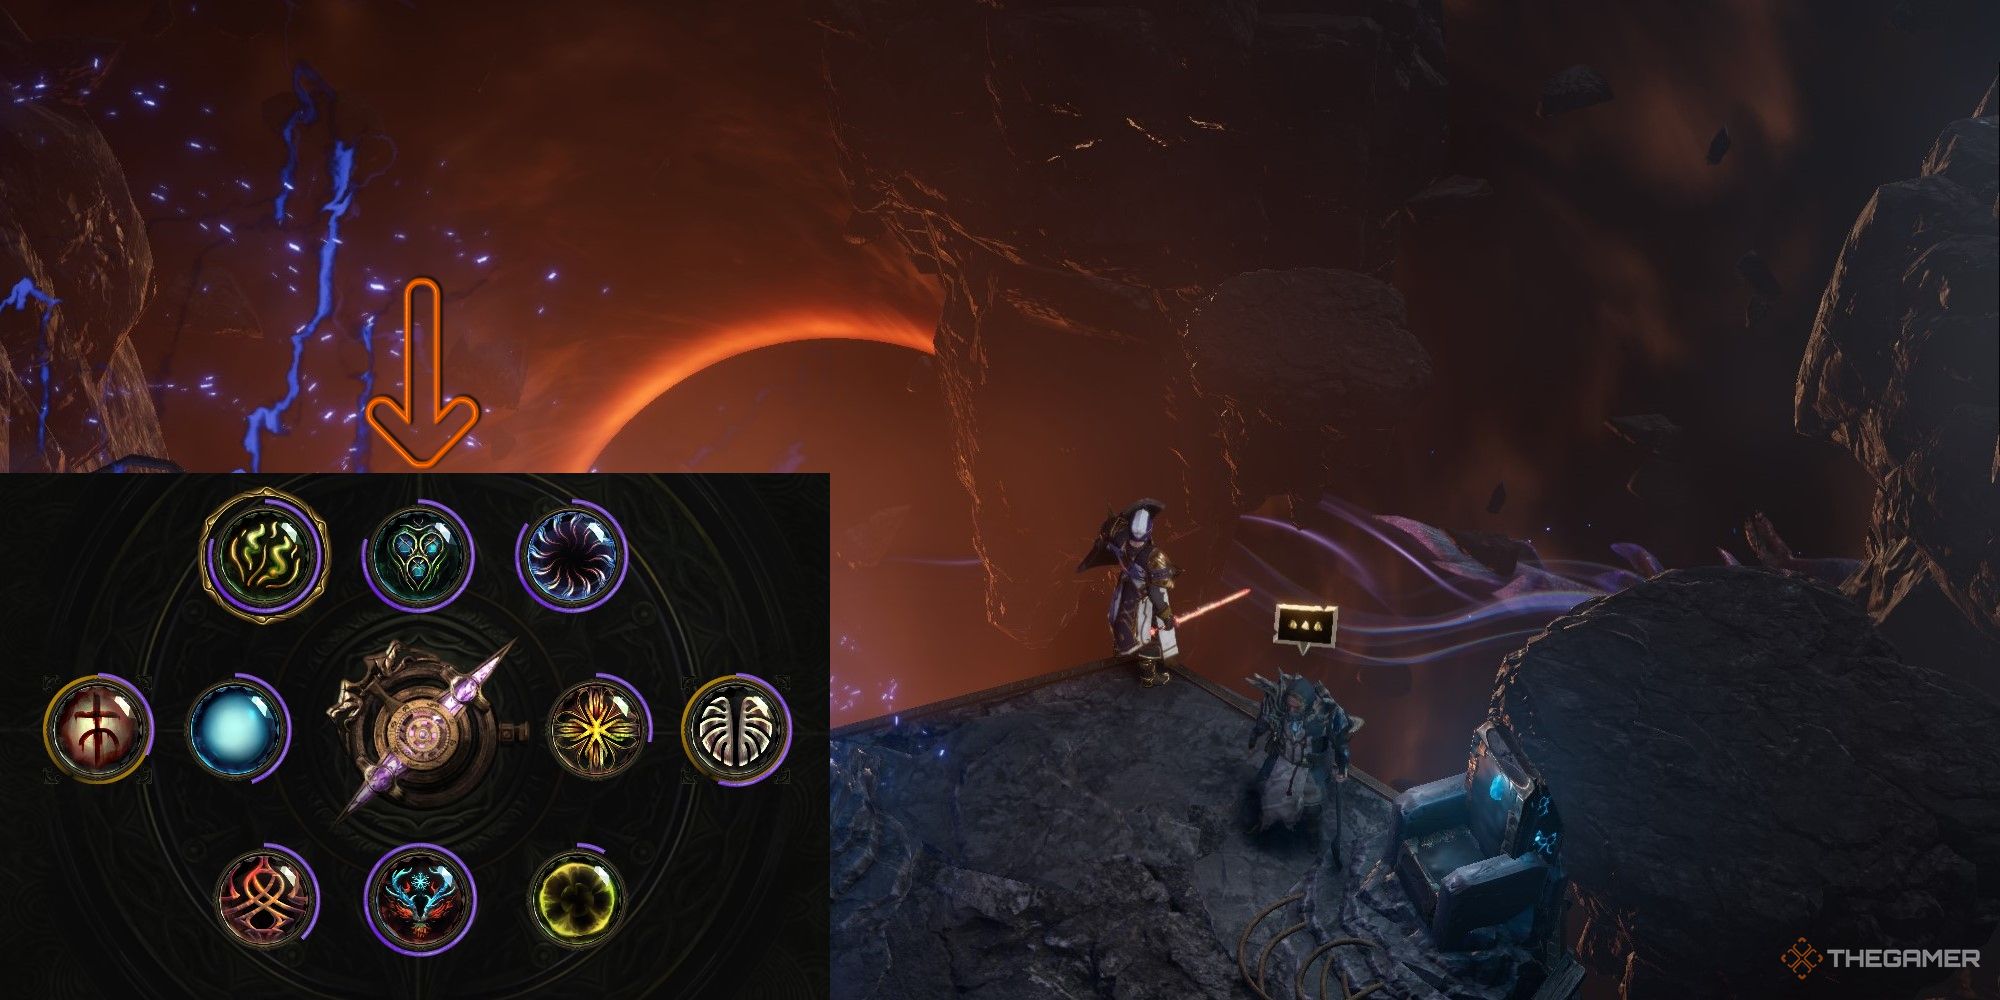 Last Epoch Character At The End Of Time With The Blessing Screen On The Left Side.